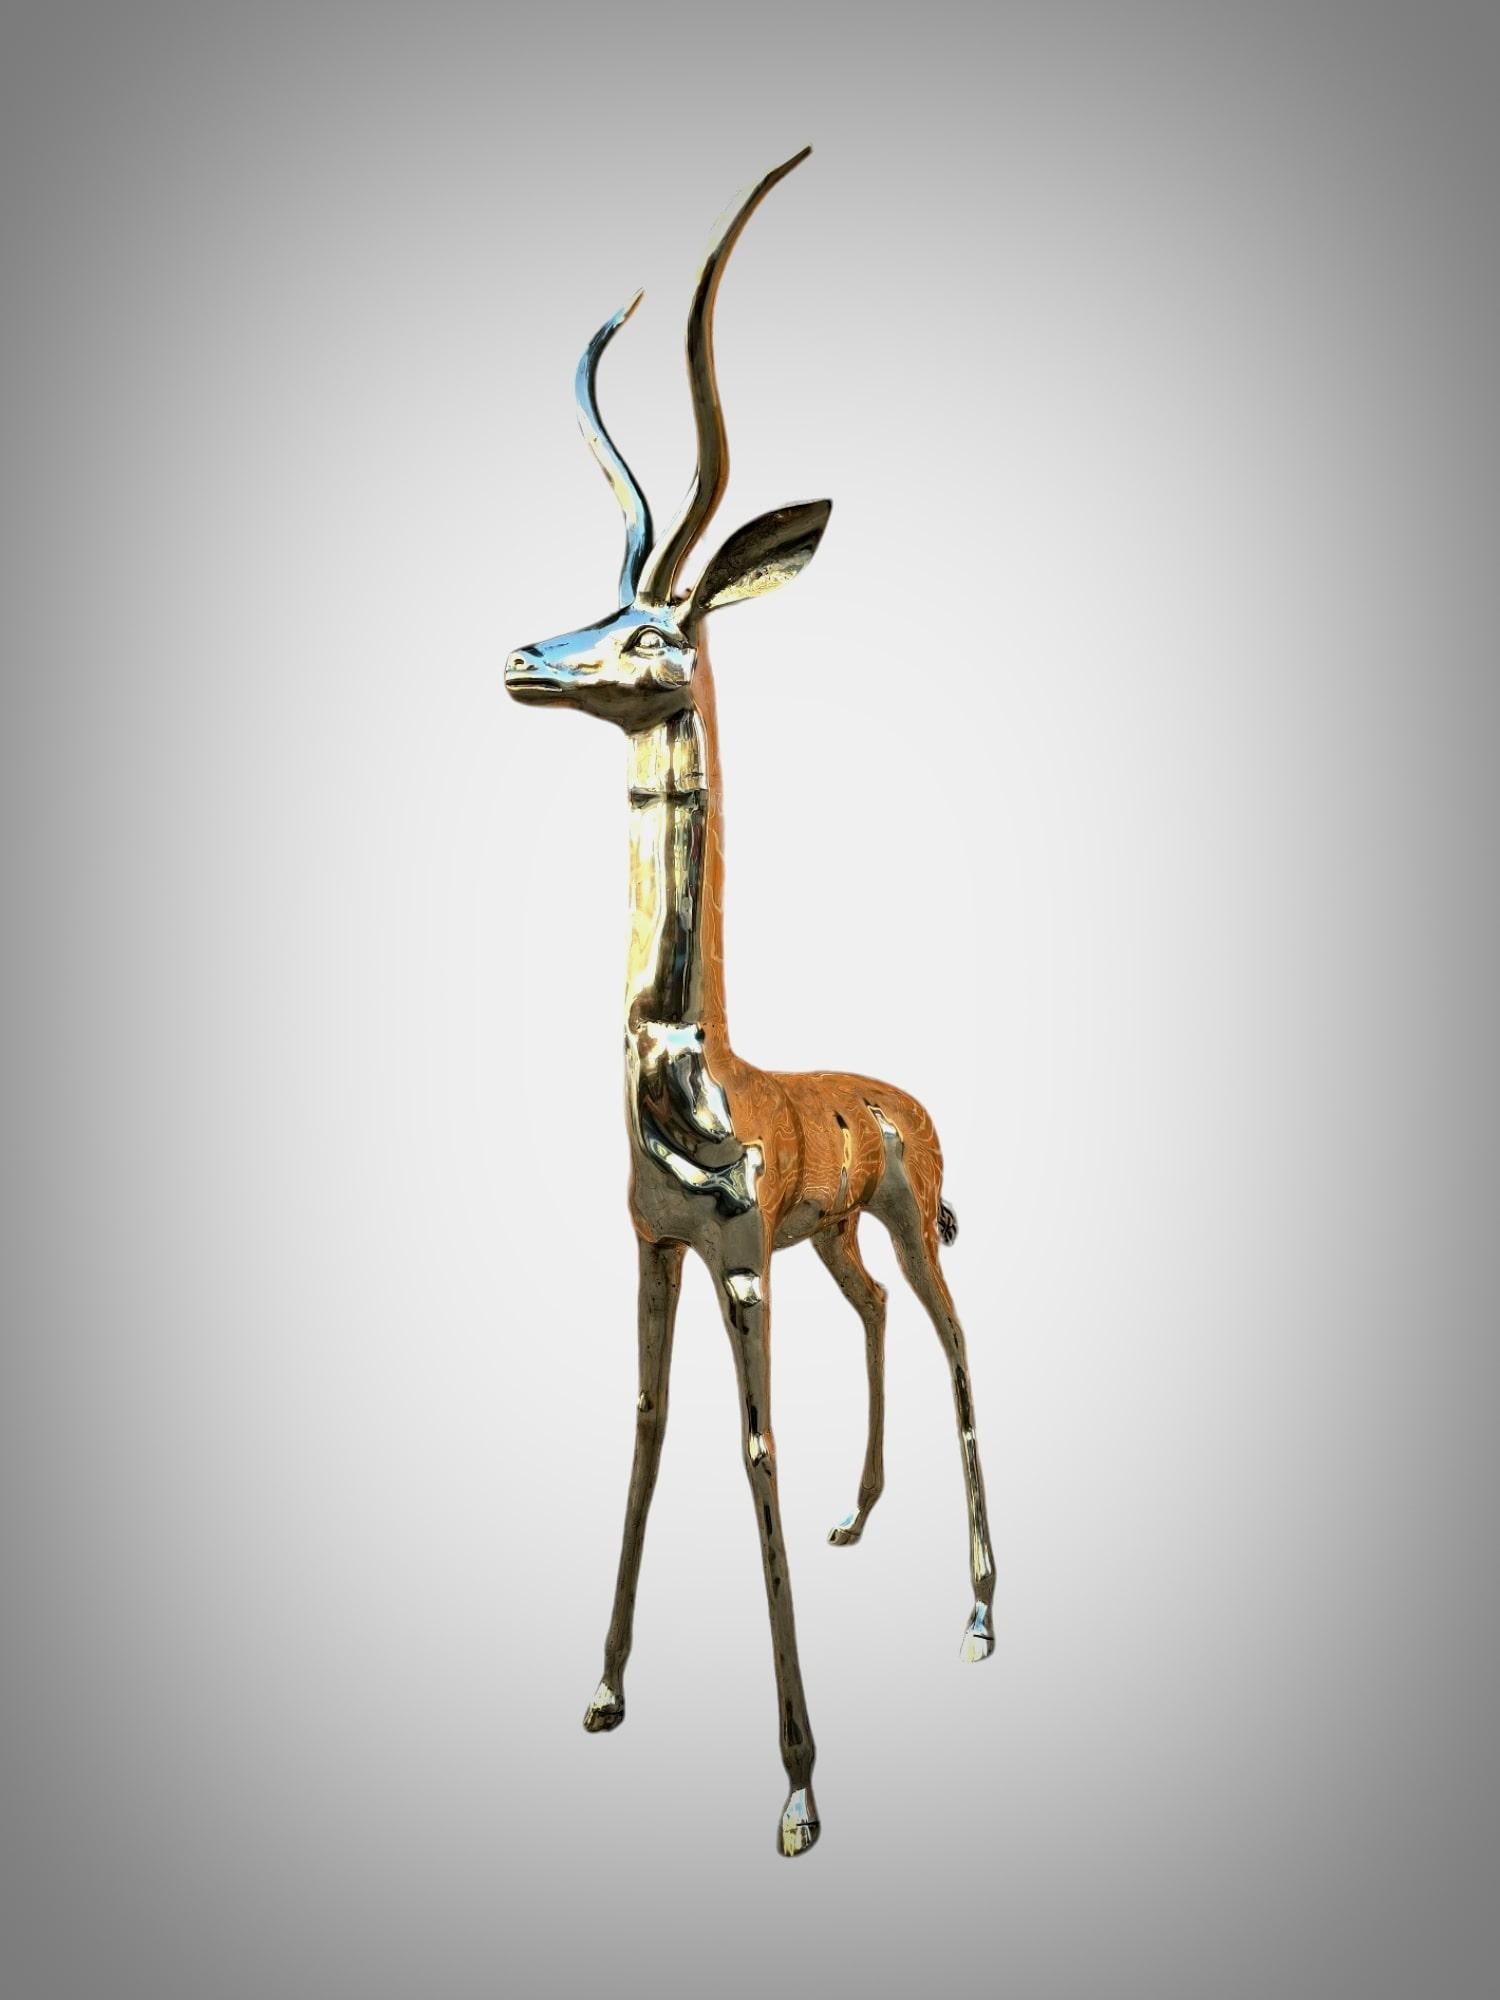 Exquisite Polished Bronze Sculpture: Lifesize Antelope from the 1950s For Sale 4